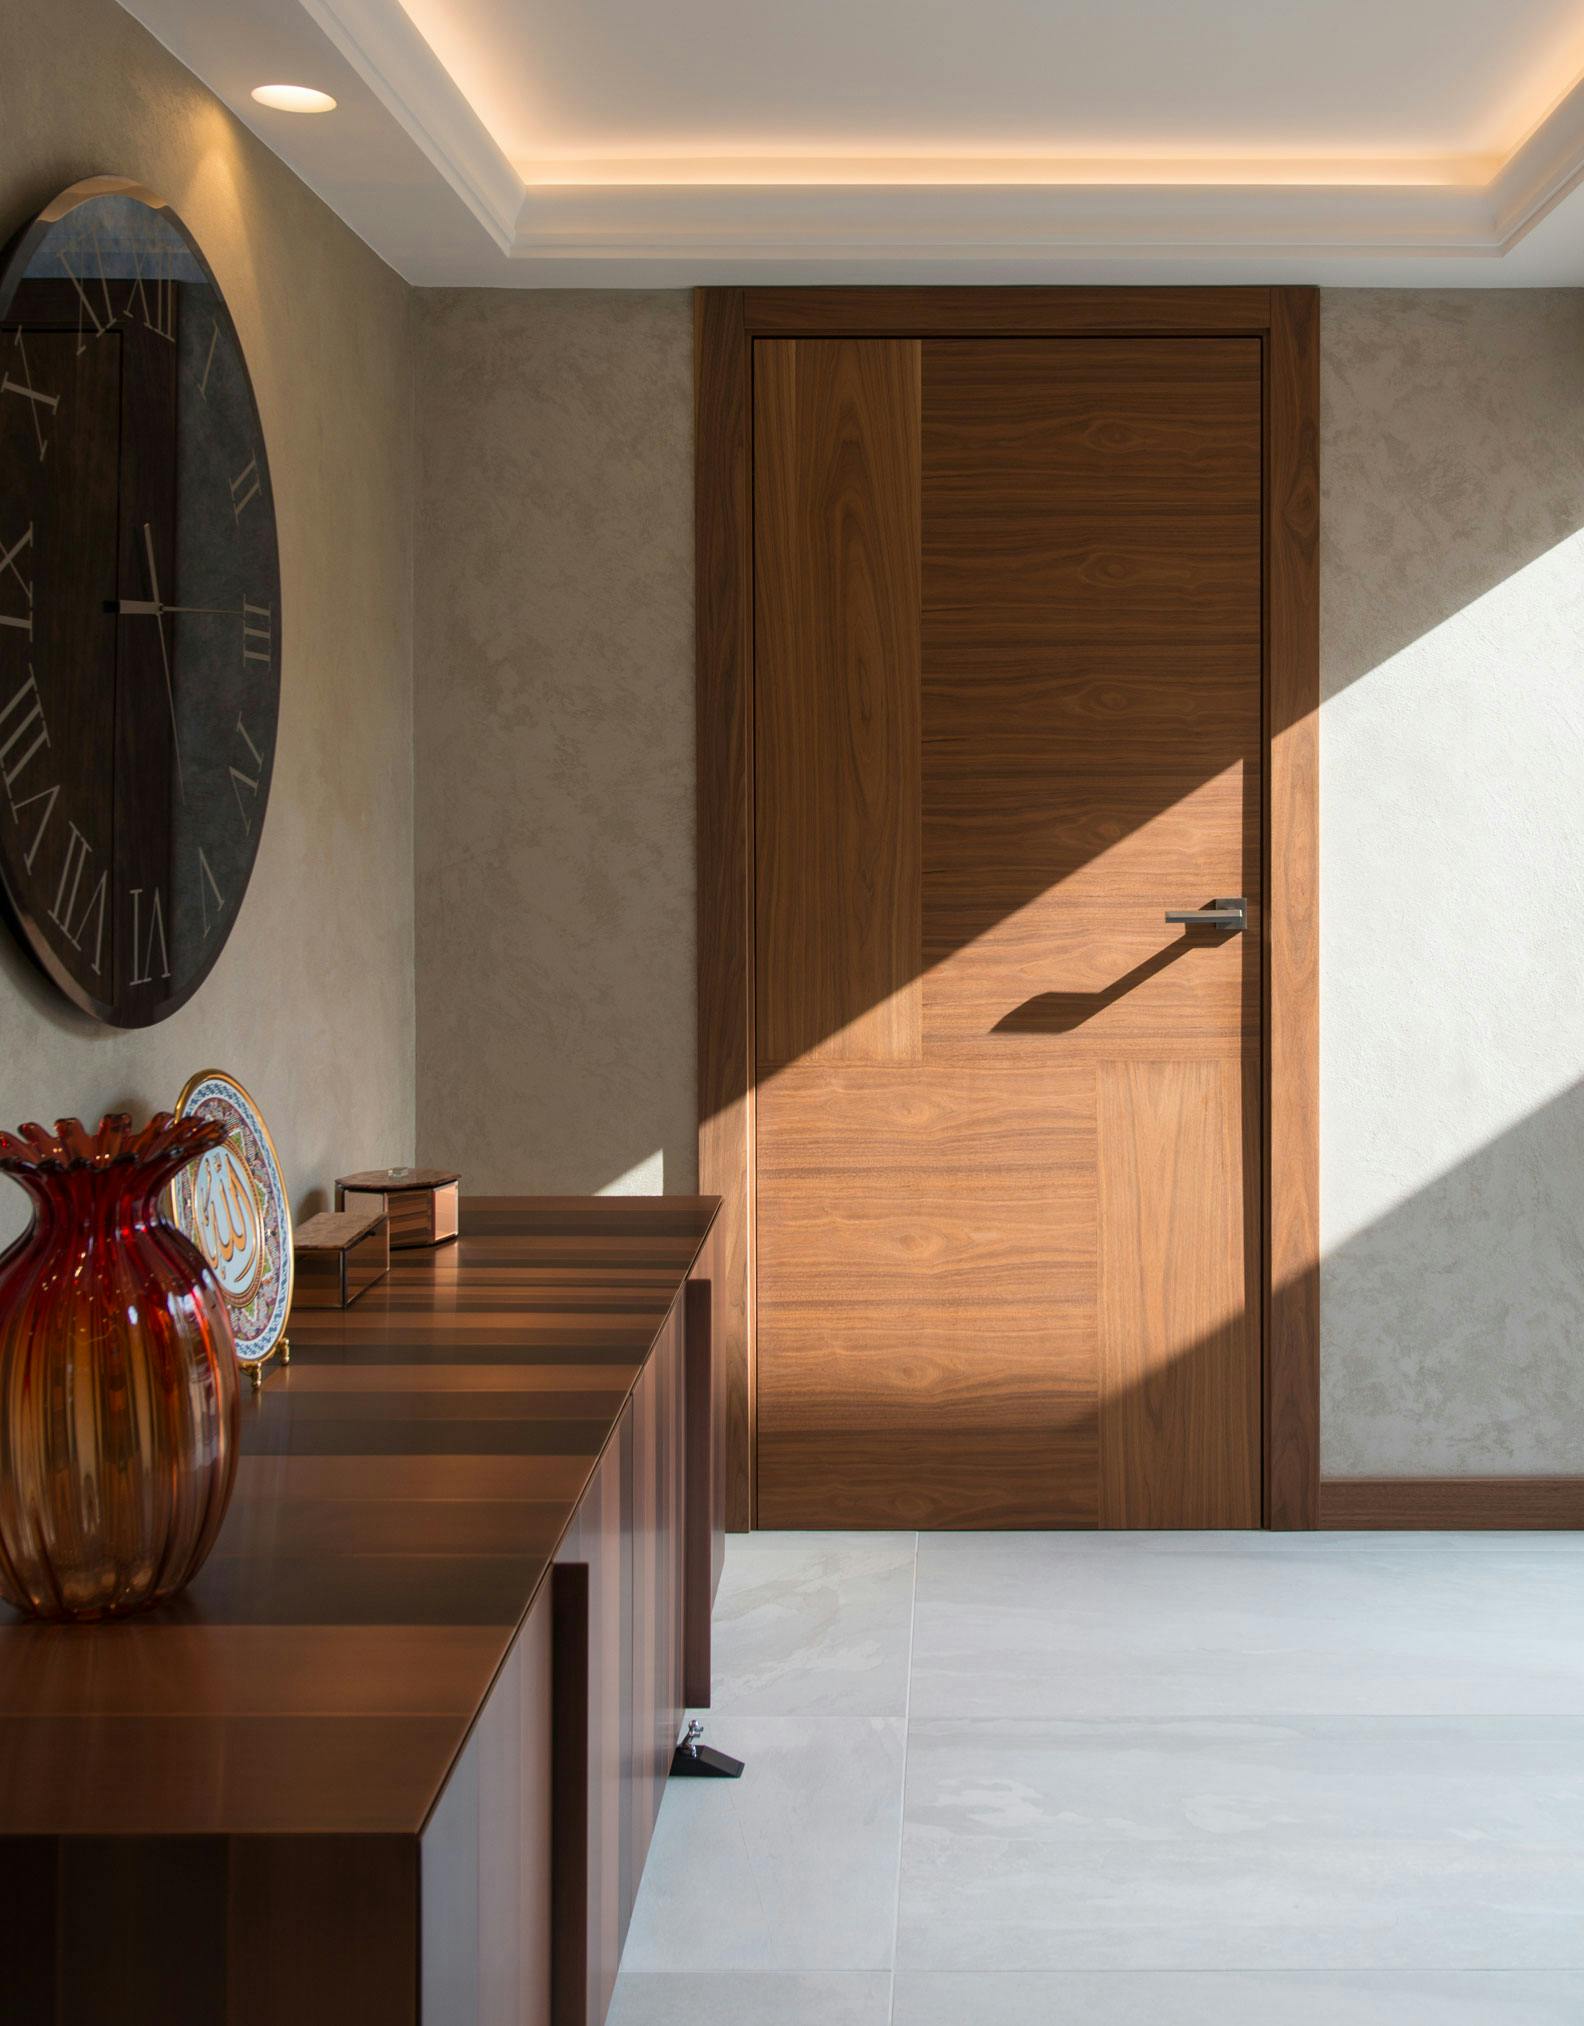 Luxury hallway with a bespoke door set by Deuren in Vario 4 style and with a walnut finish